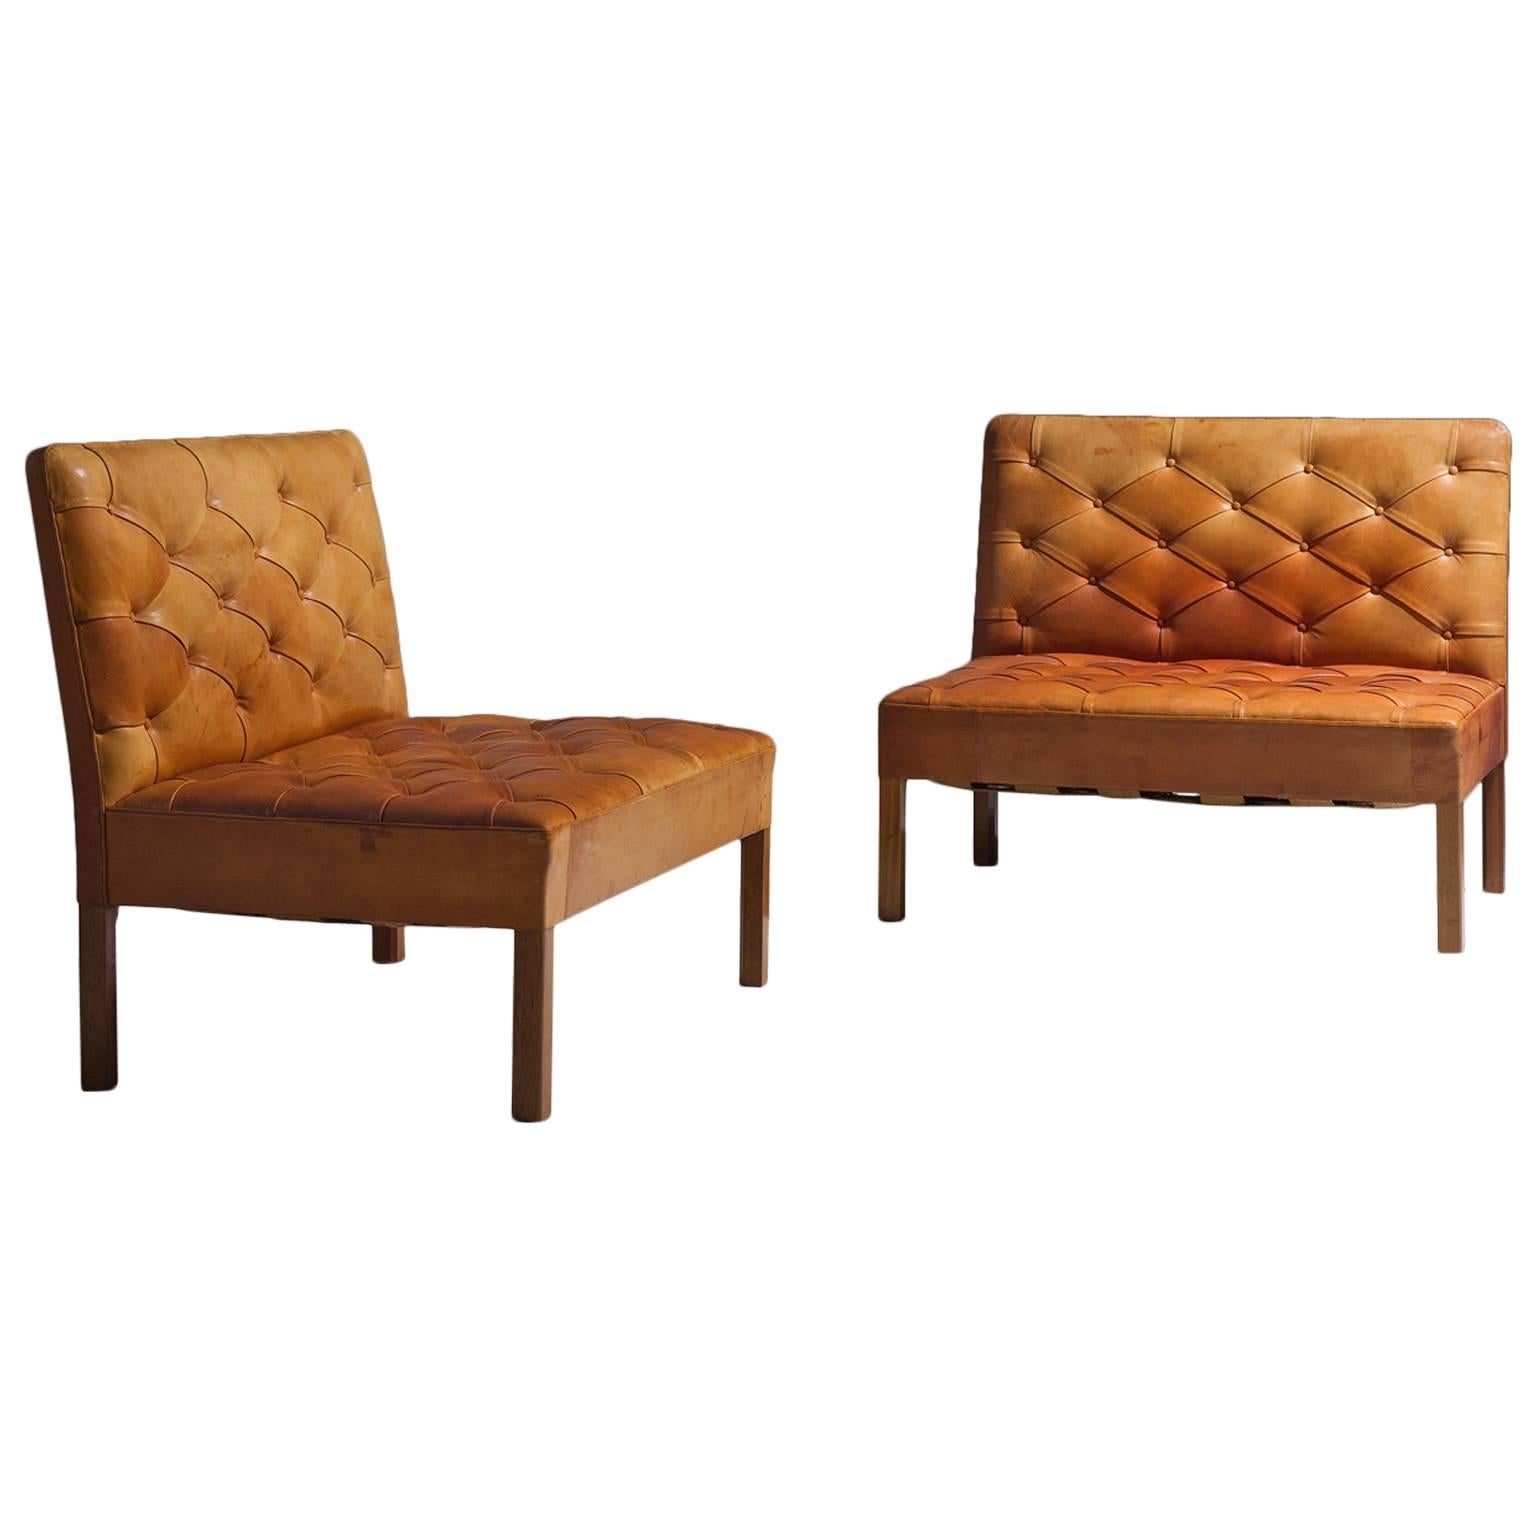 Kaare Klint Two Addition Sofa's in Original Cognac Leather